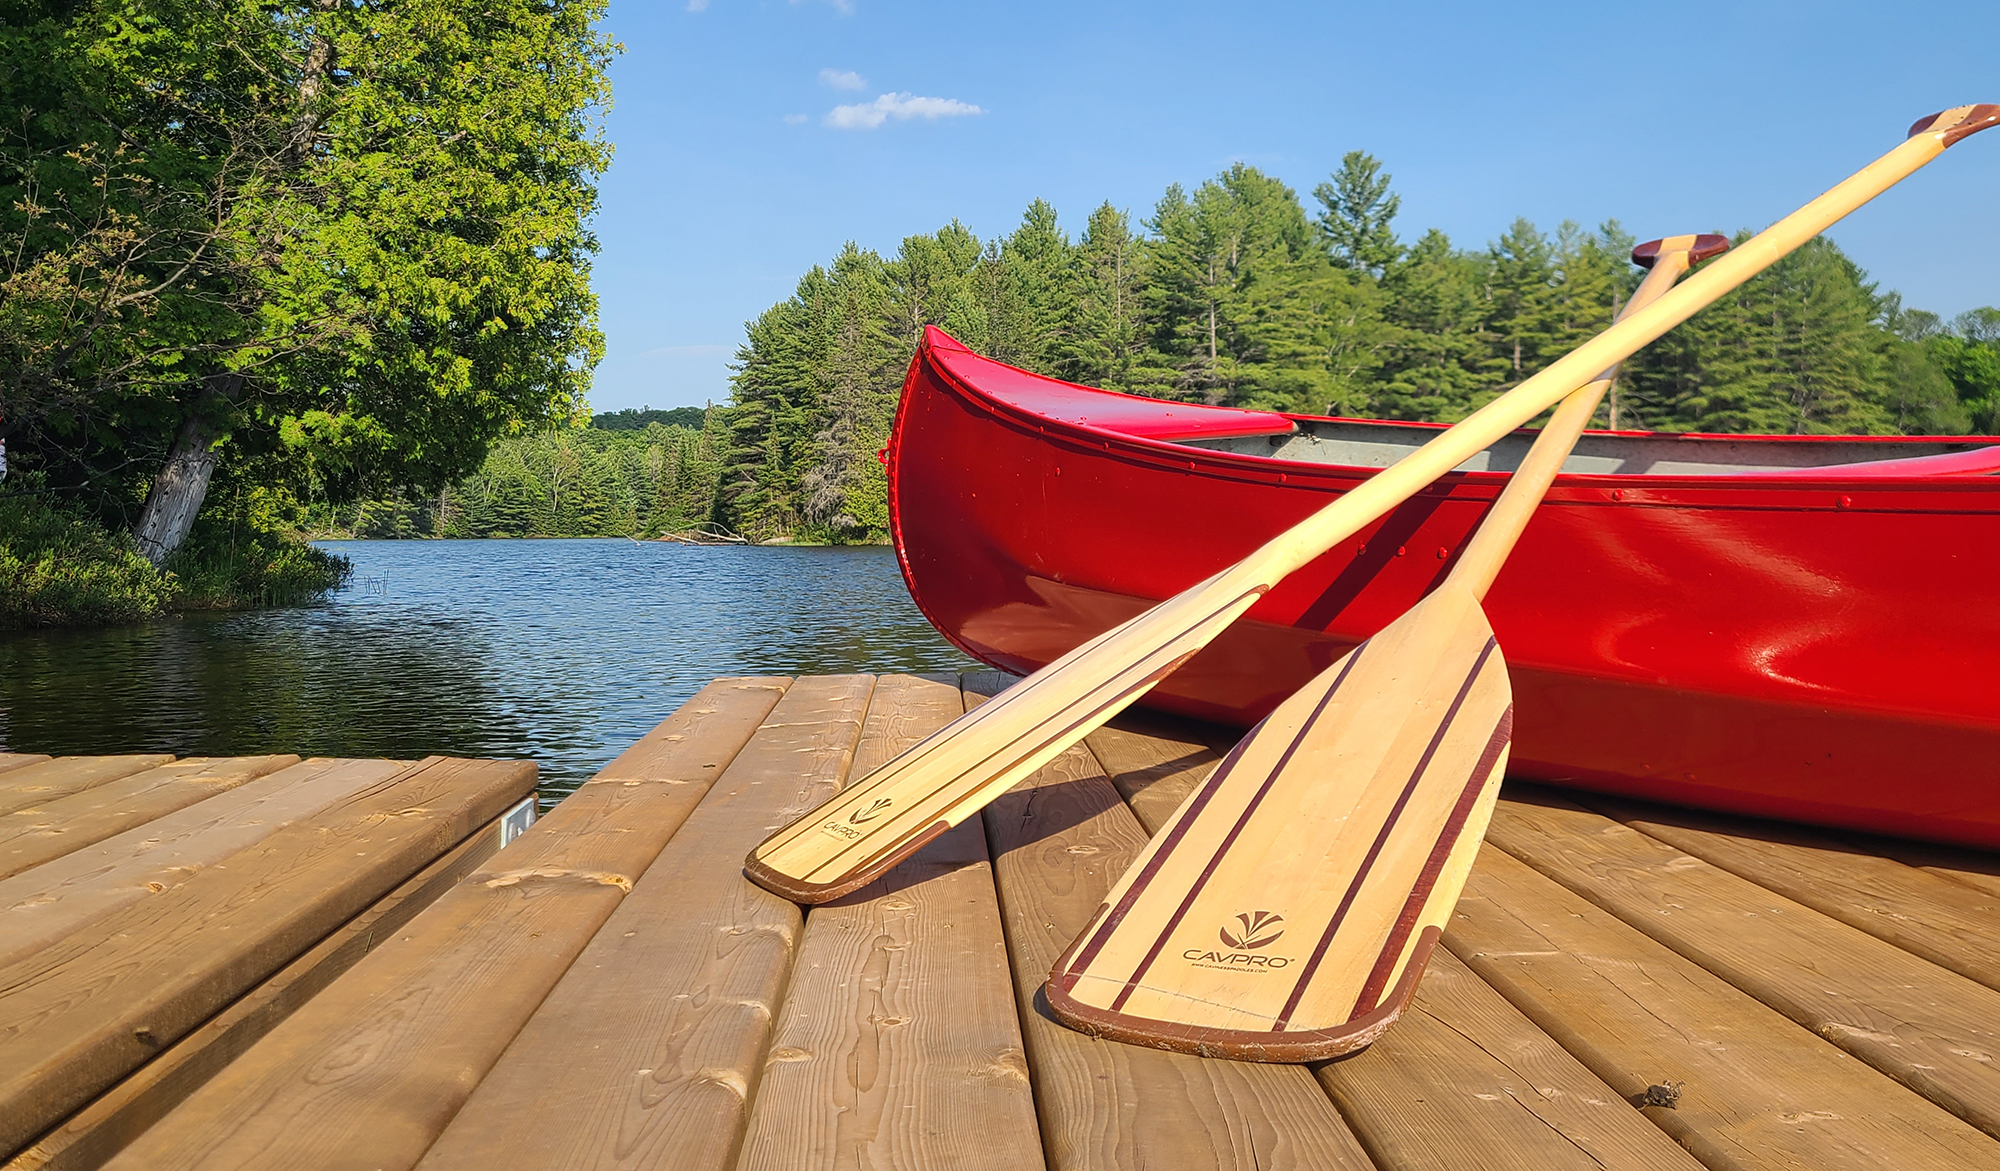 Two paddles leaning against red canoe perched on dock.